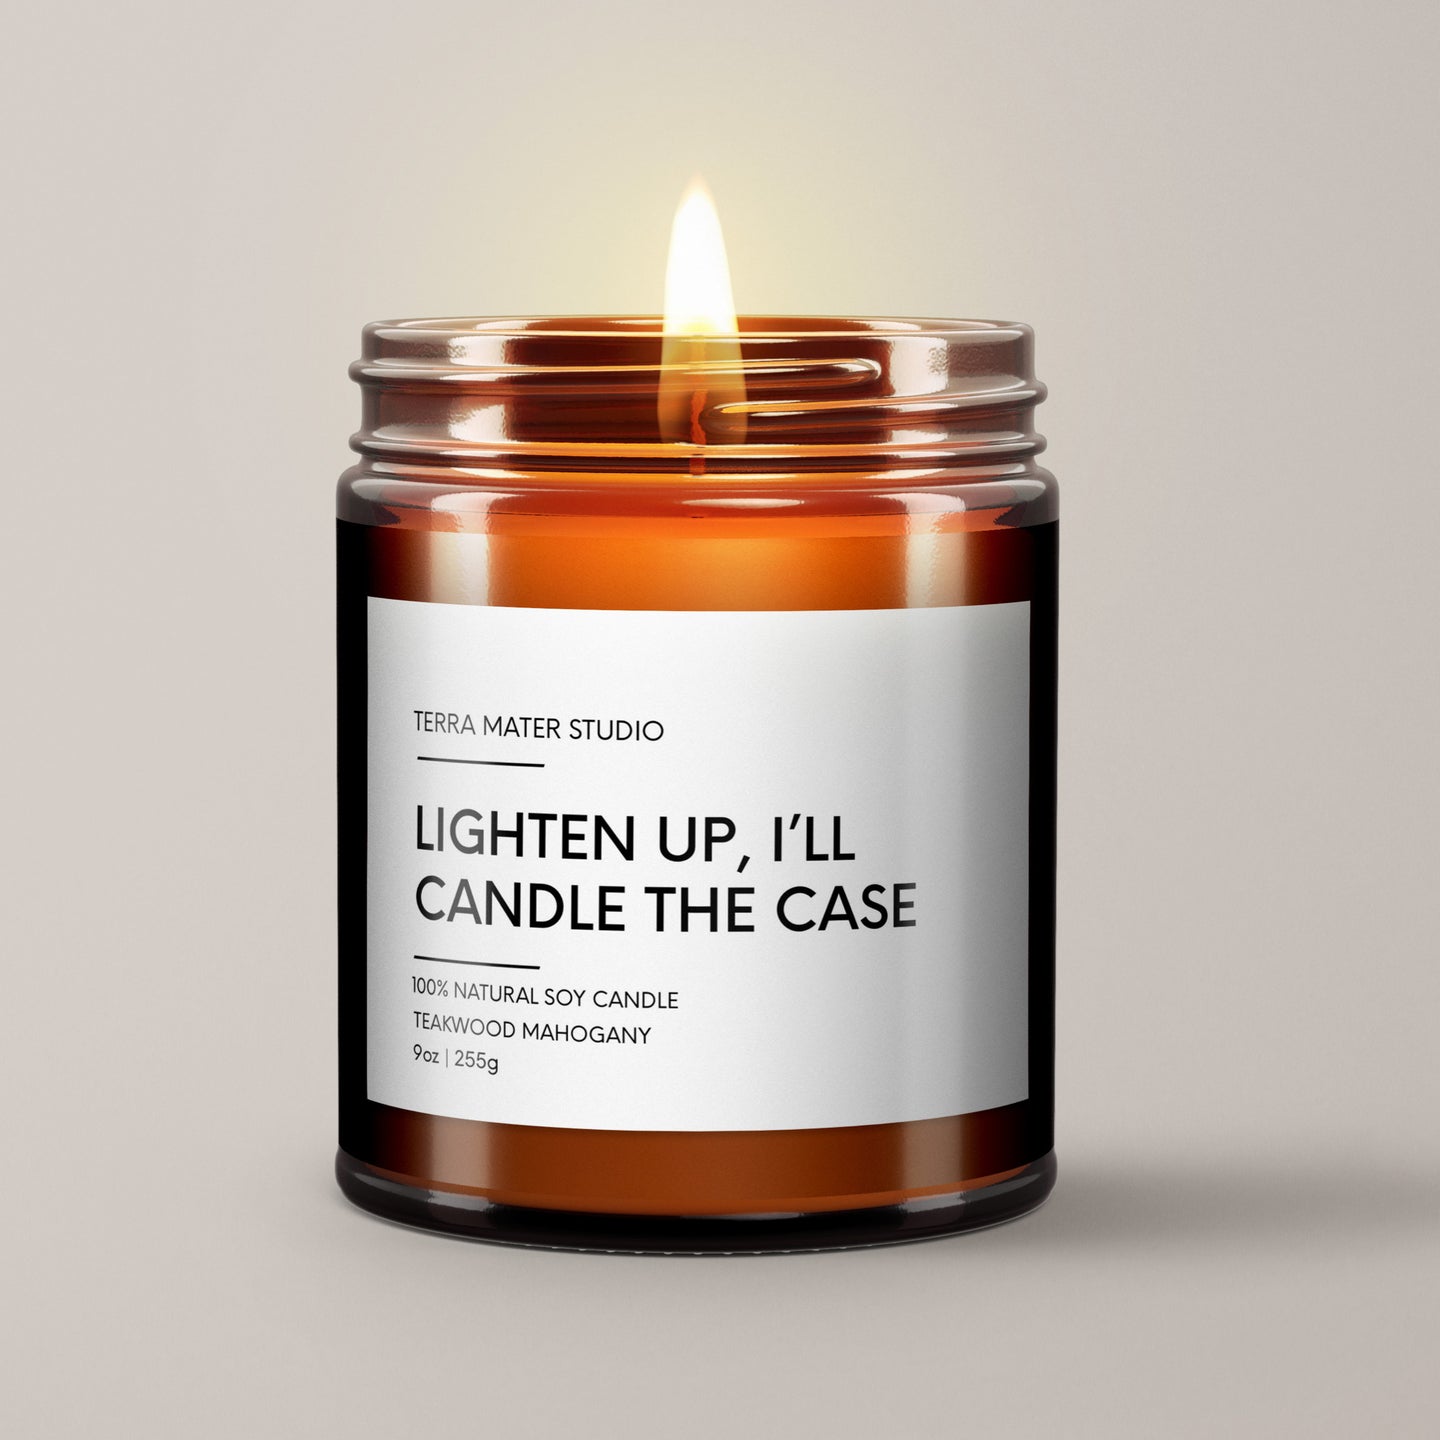 Lighten Up, I’ll Candle The Case | Soy Wax Candle